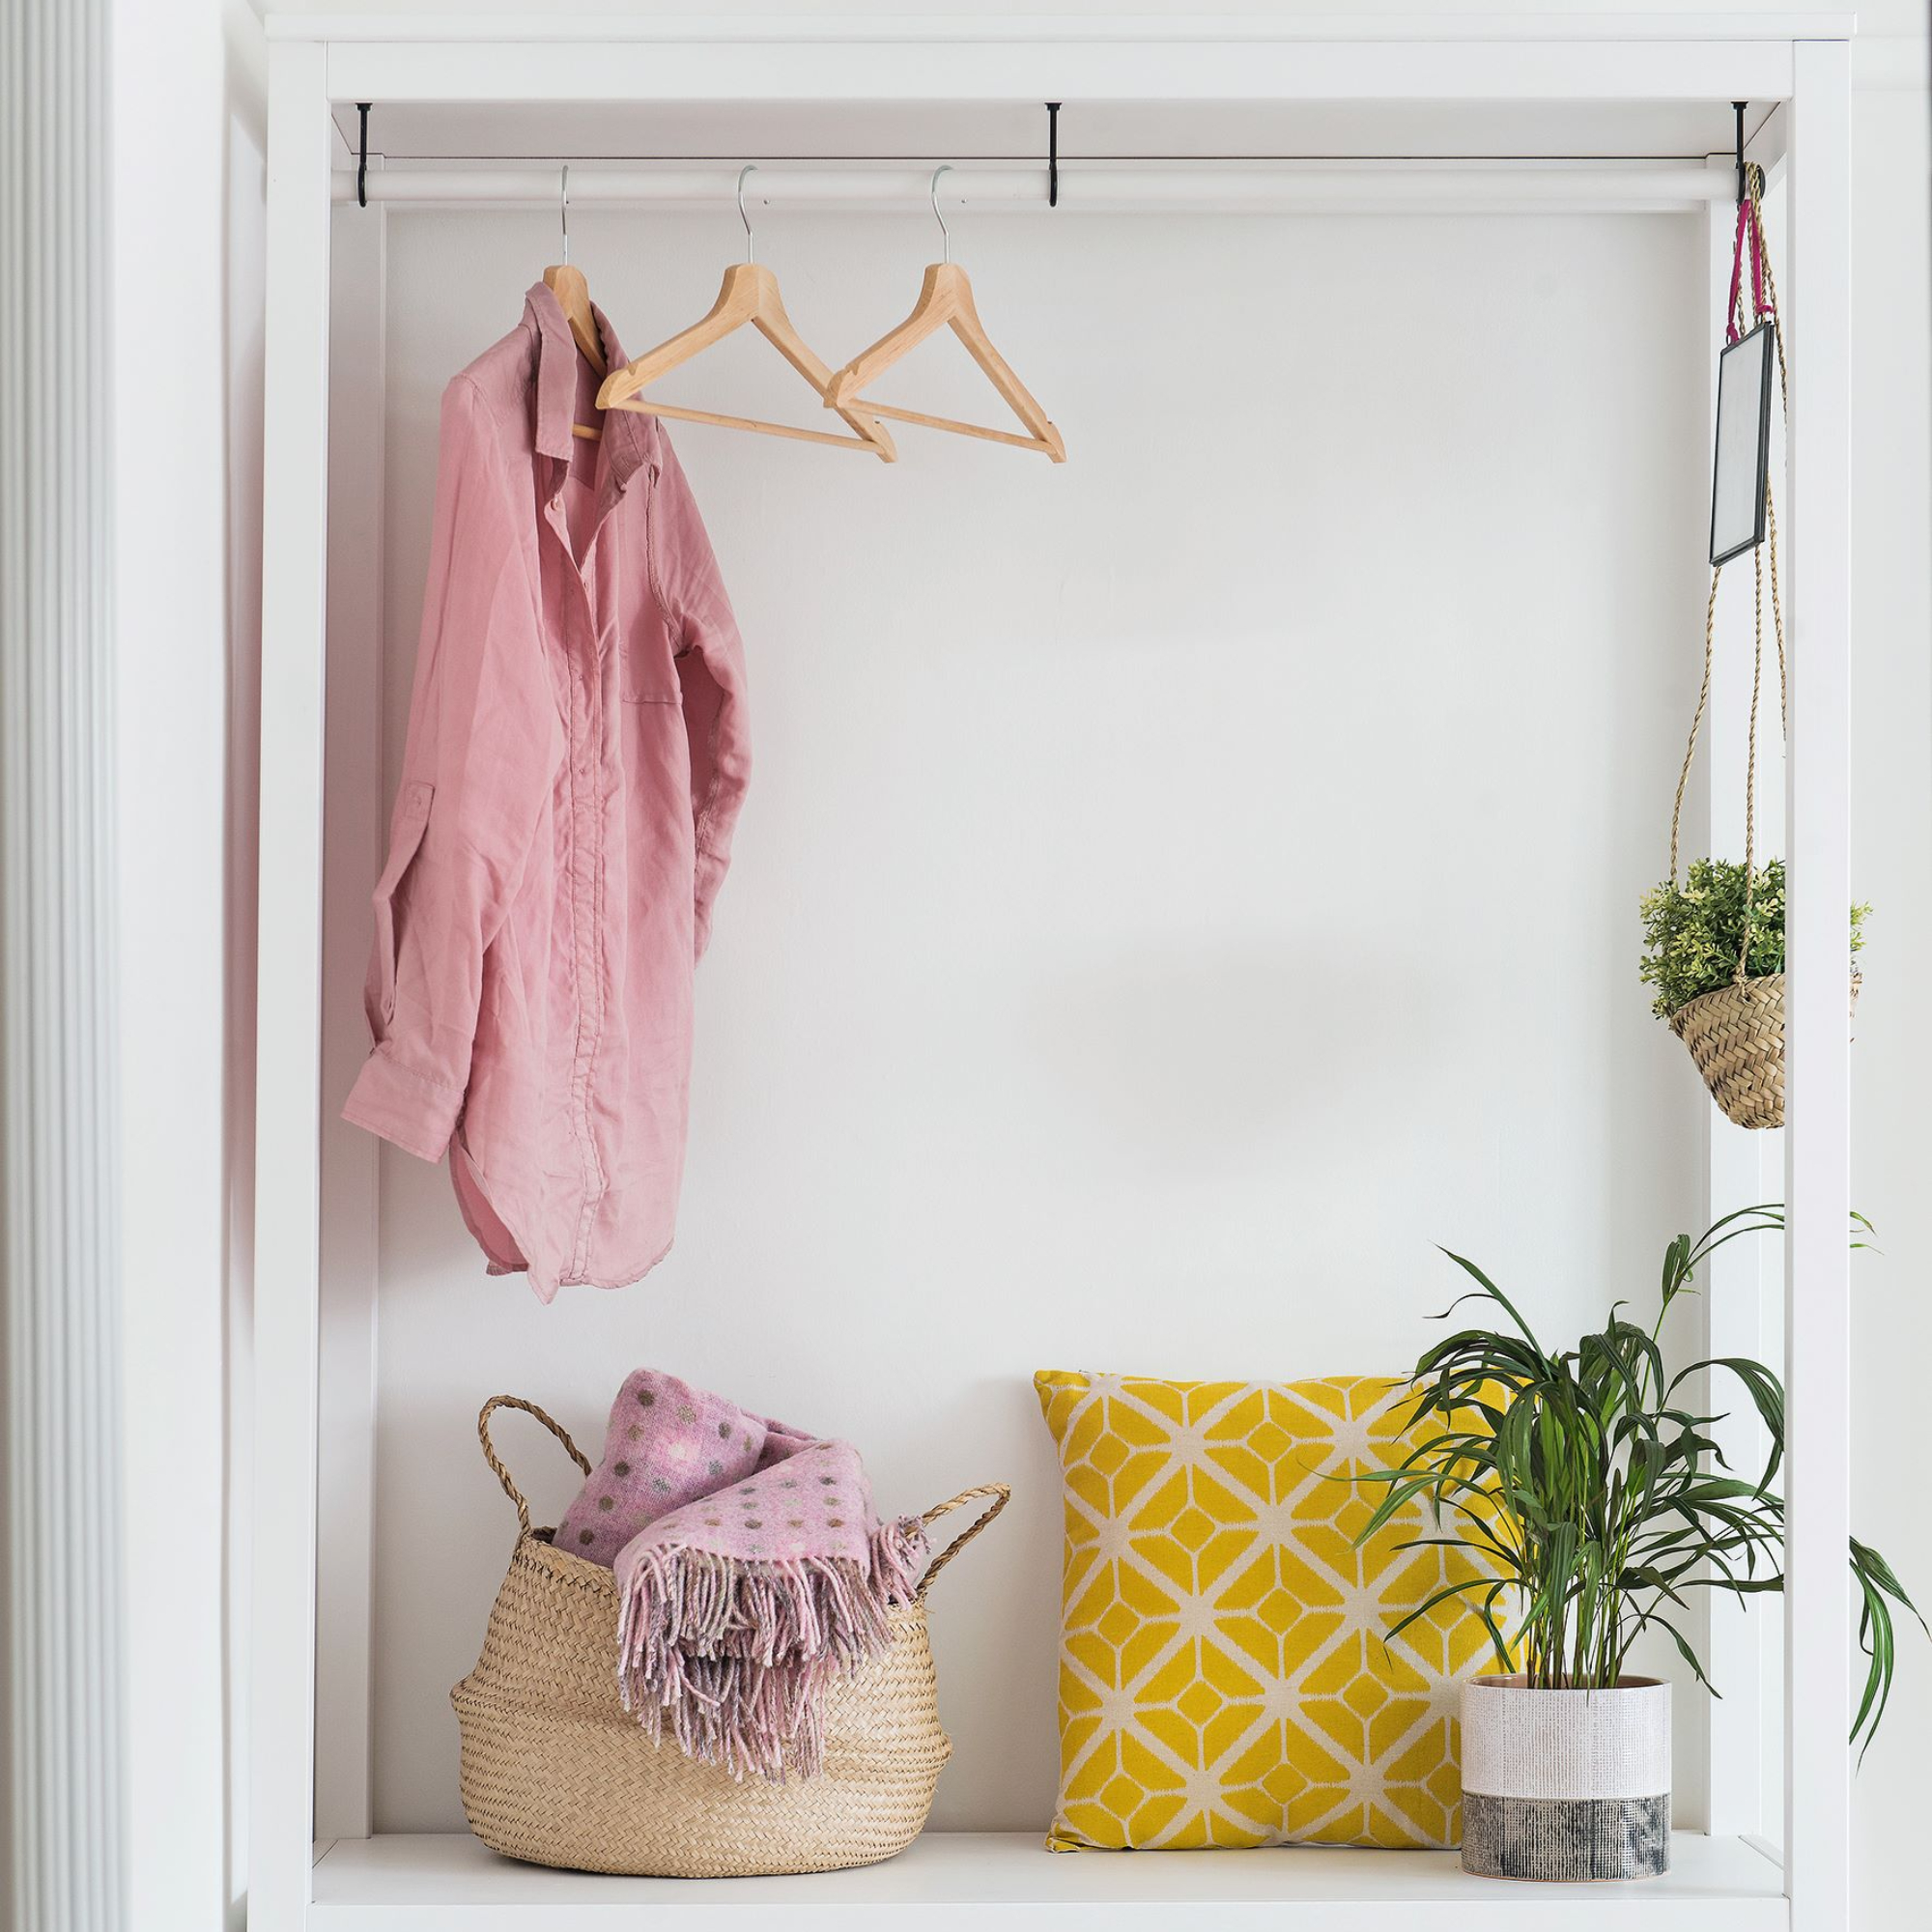 White storage unit with cabinets and hanging rail against white wall, with plants and objects in green, yellow, pink, and white